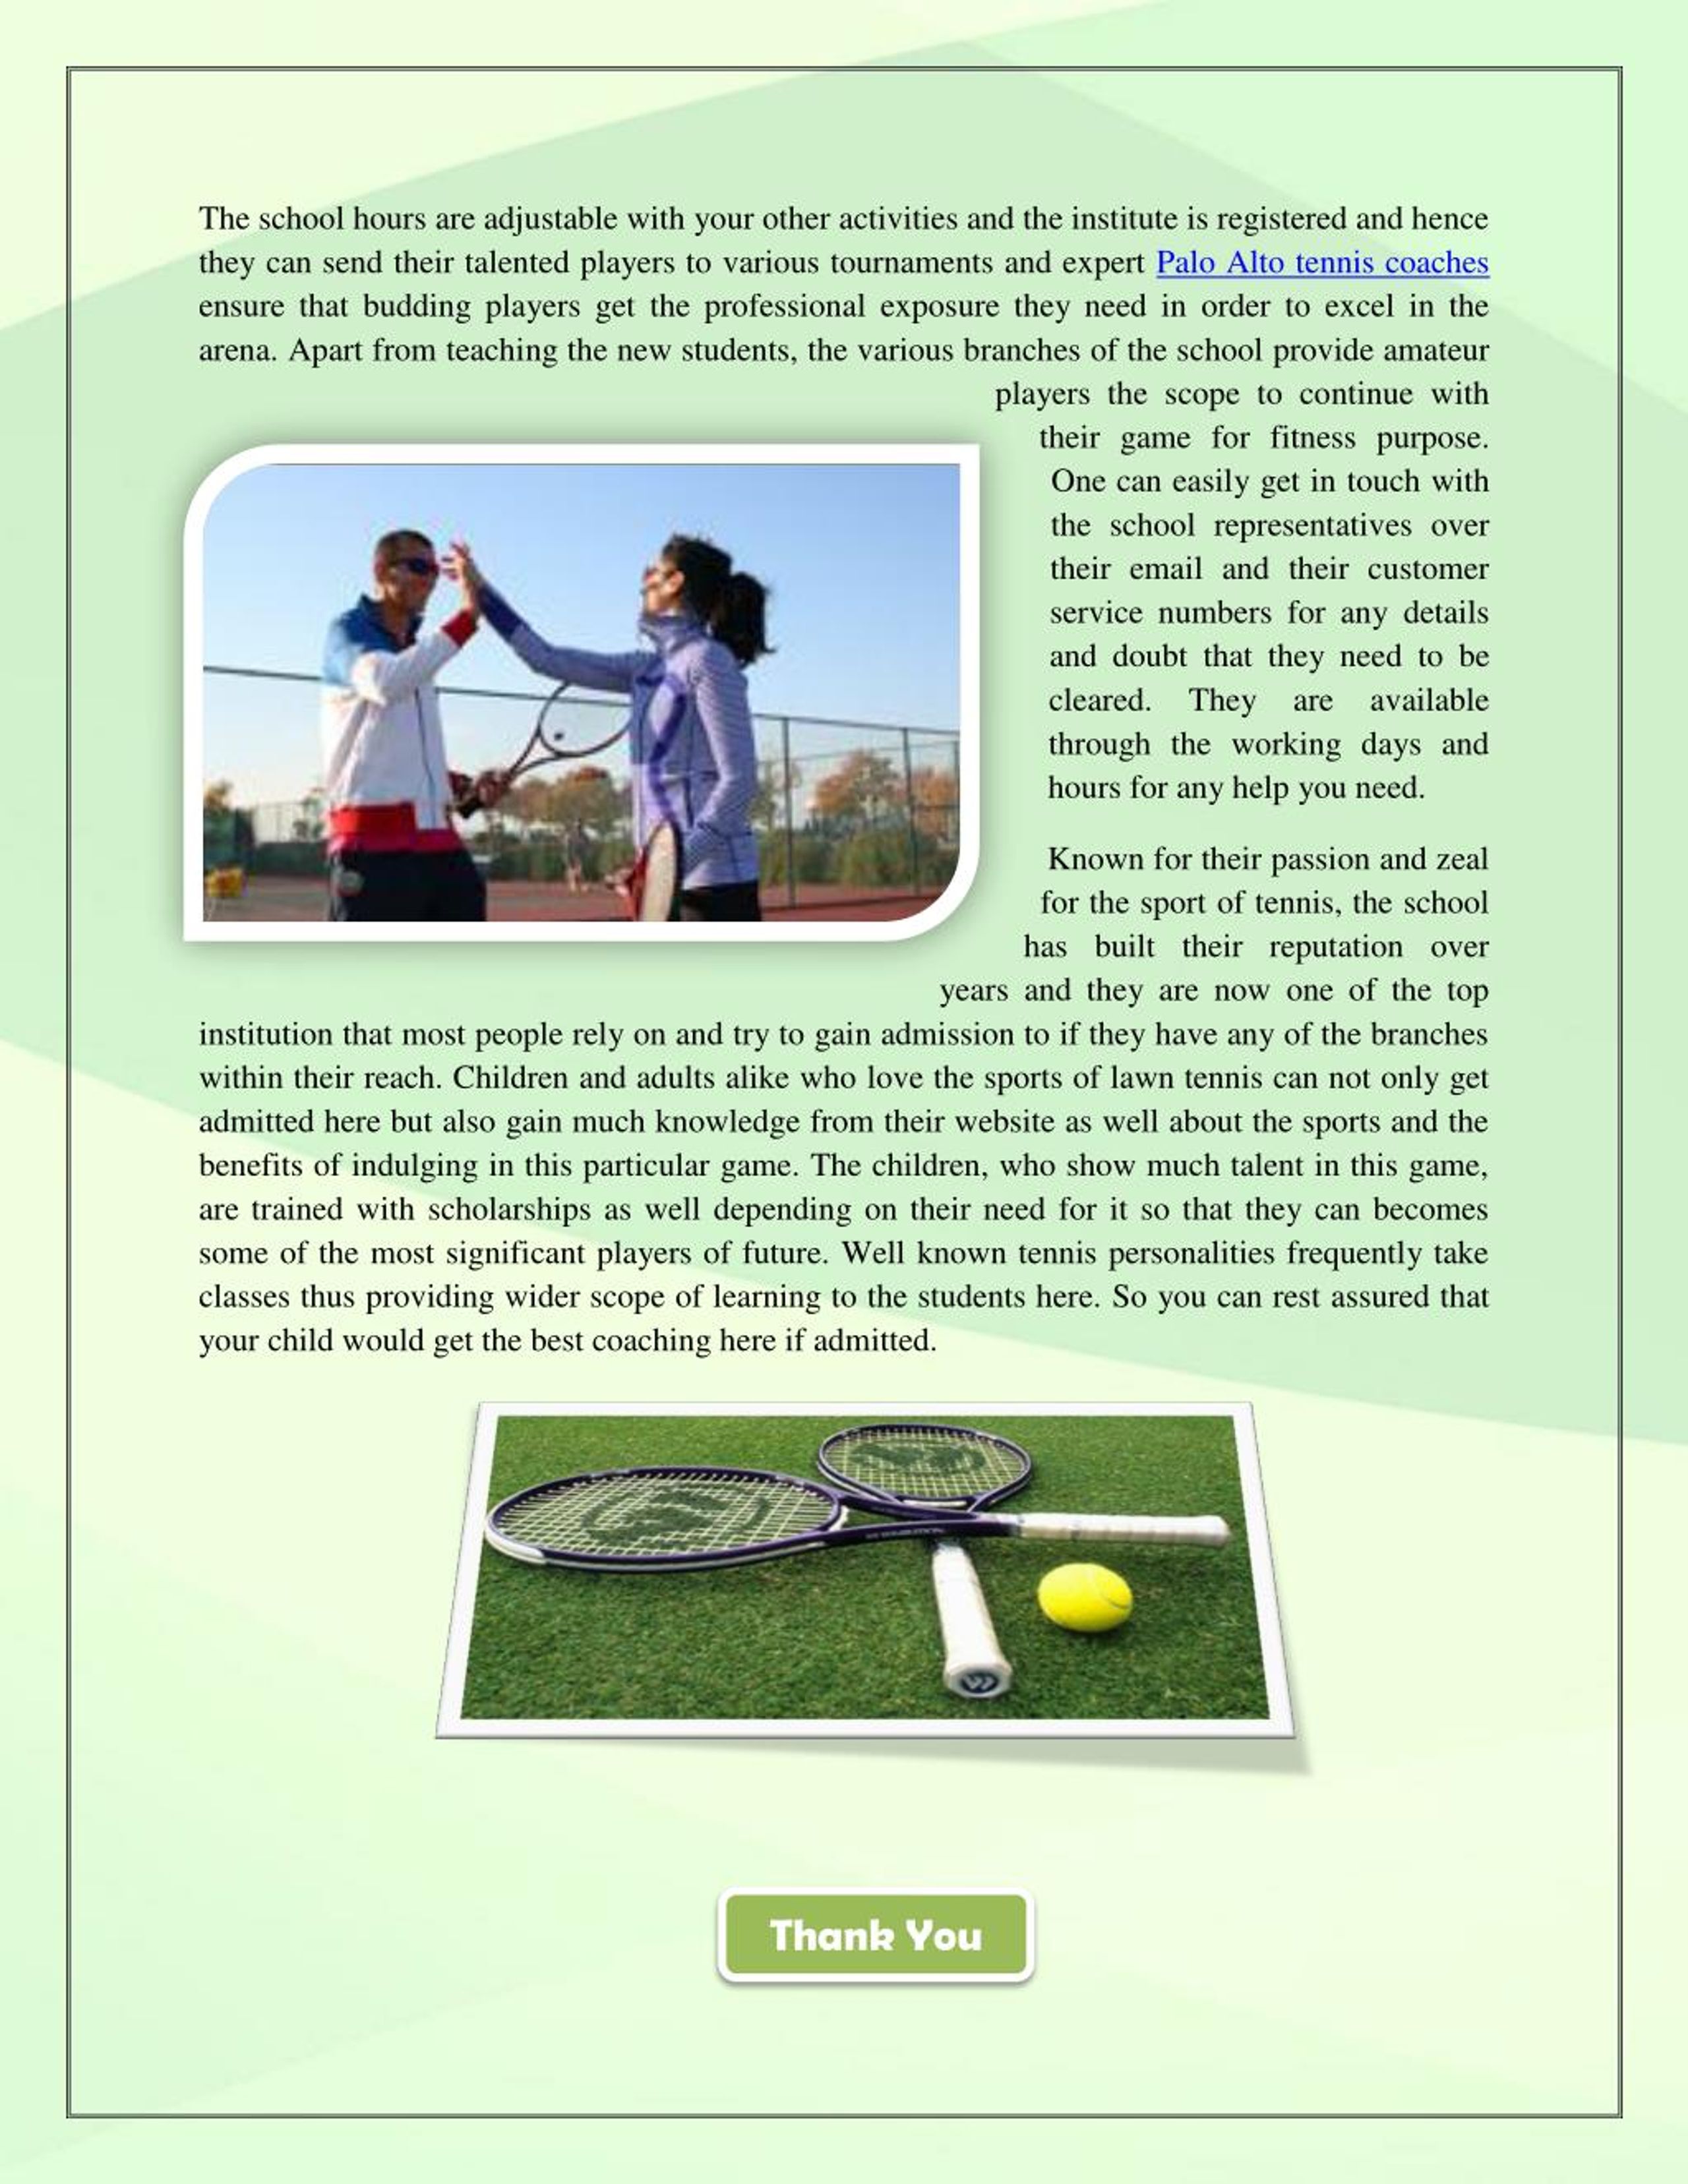 PPT - Get the Best Tennis Lessons at the Euro School of Tennis ...